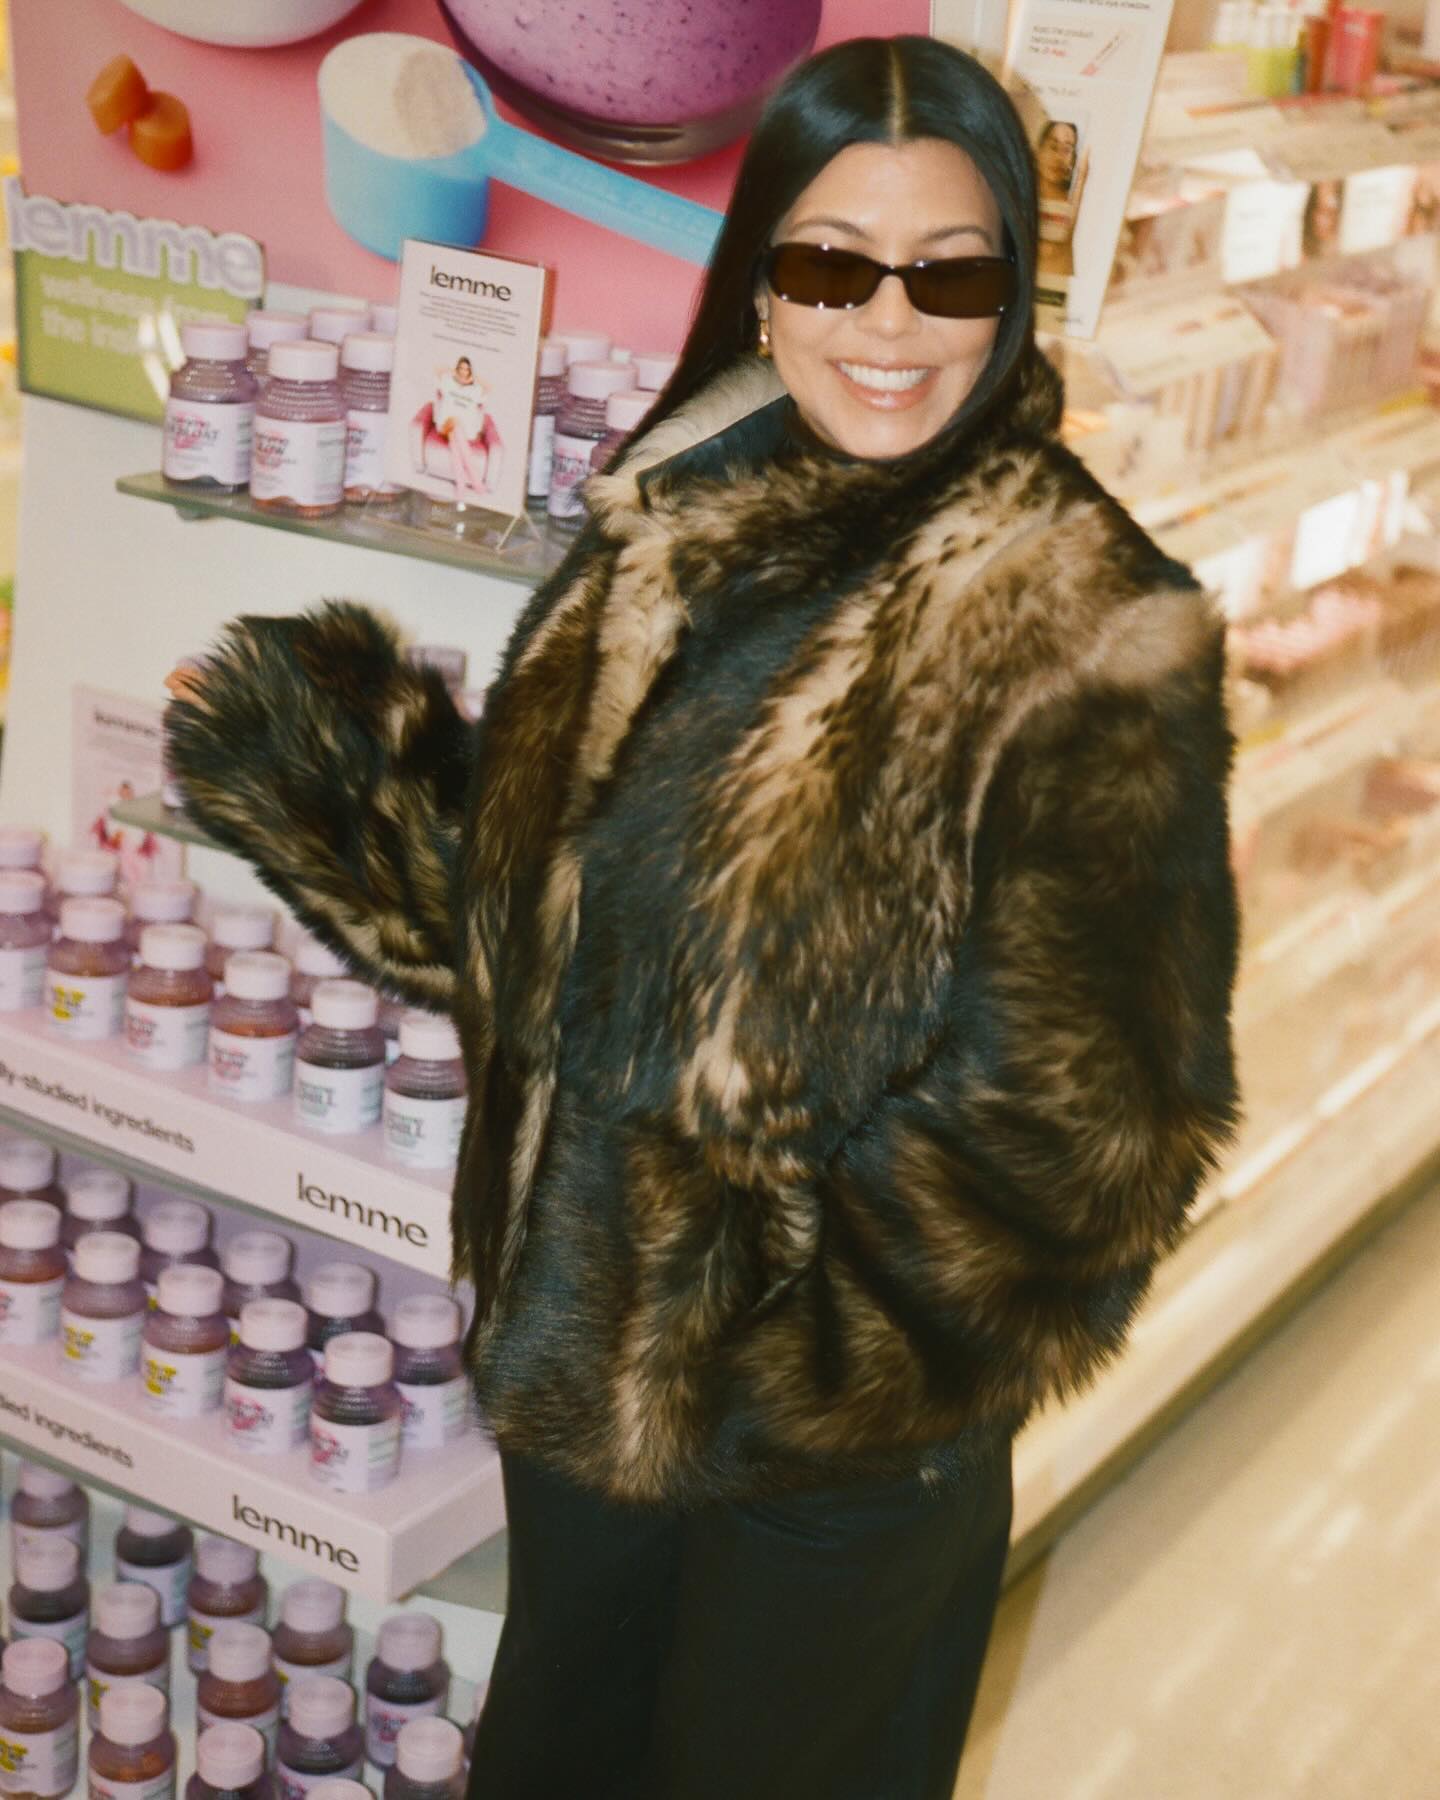 Kourtney wore a fur coat next to the Lemme store